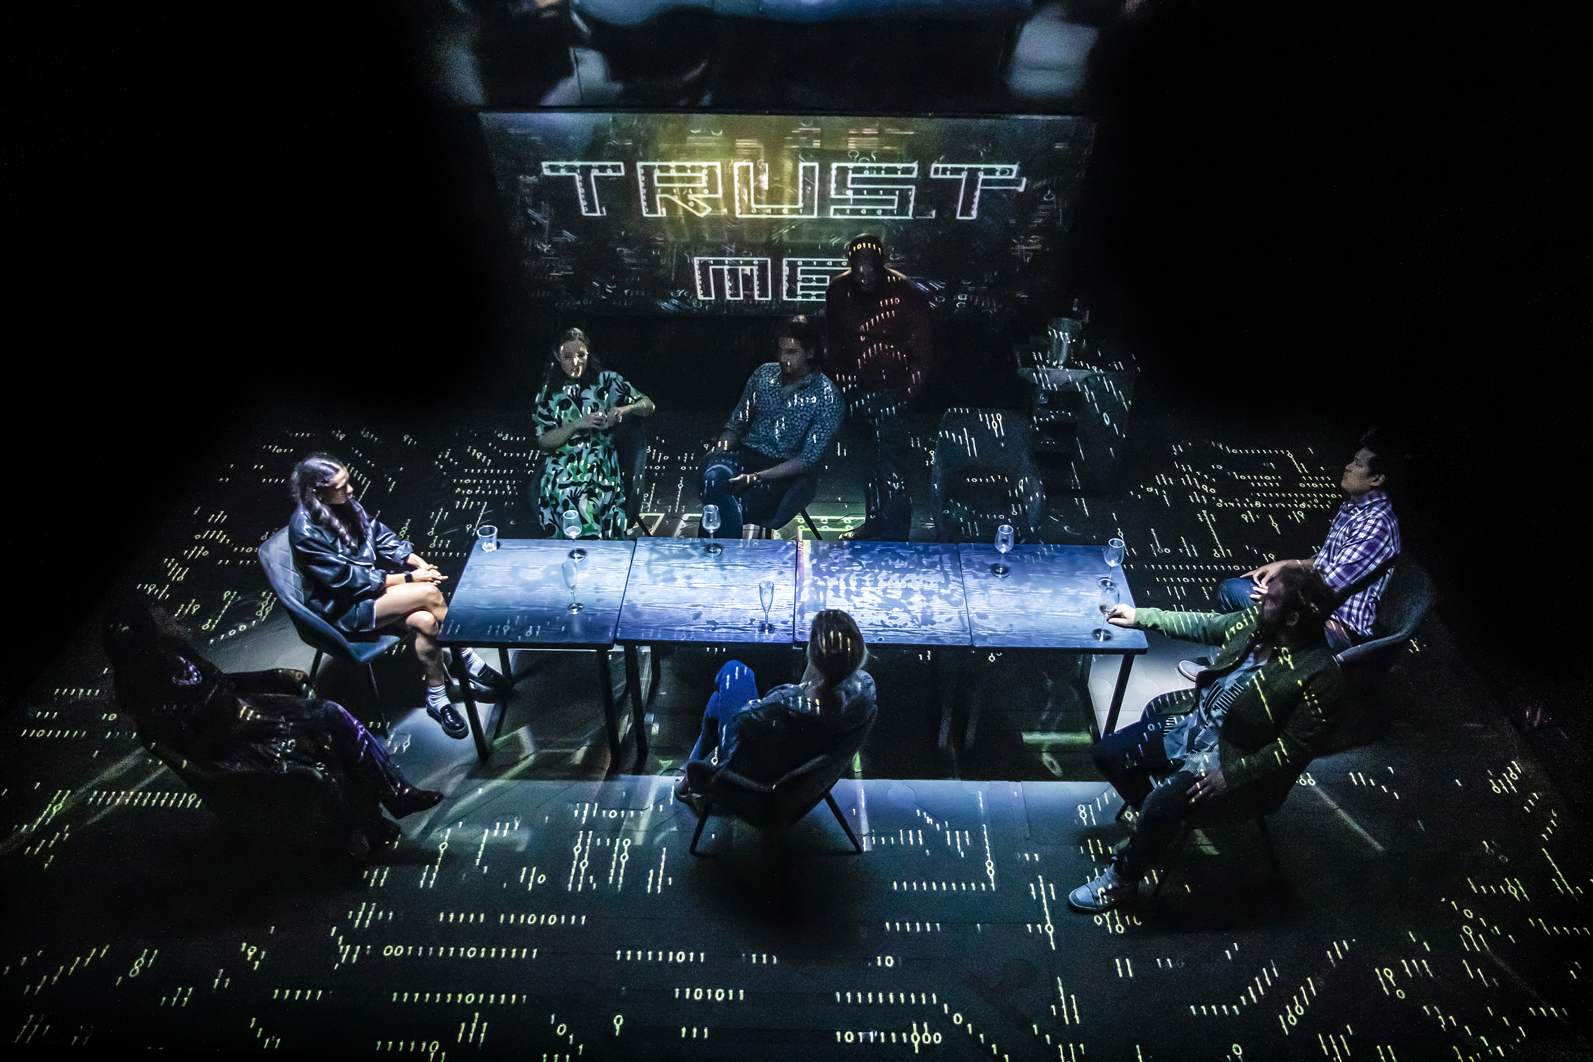 Cast members sit around a table on a stage that resembles a circuit board that displays the words "Trust Me" above them